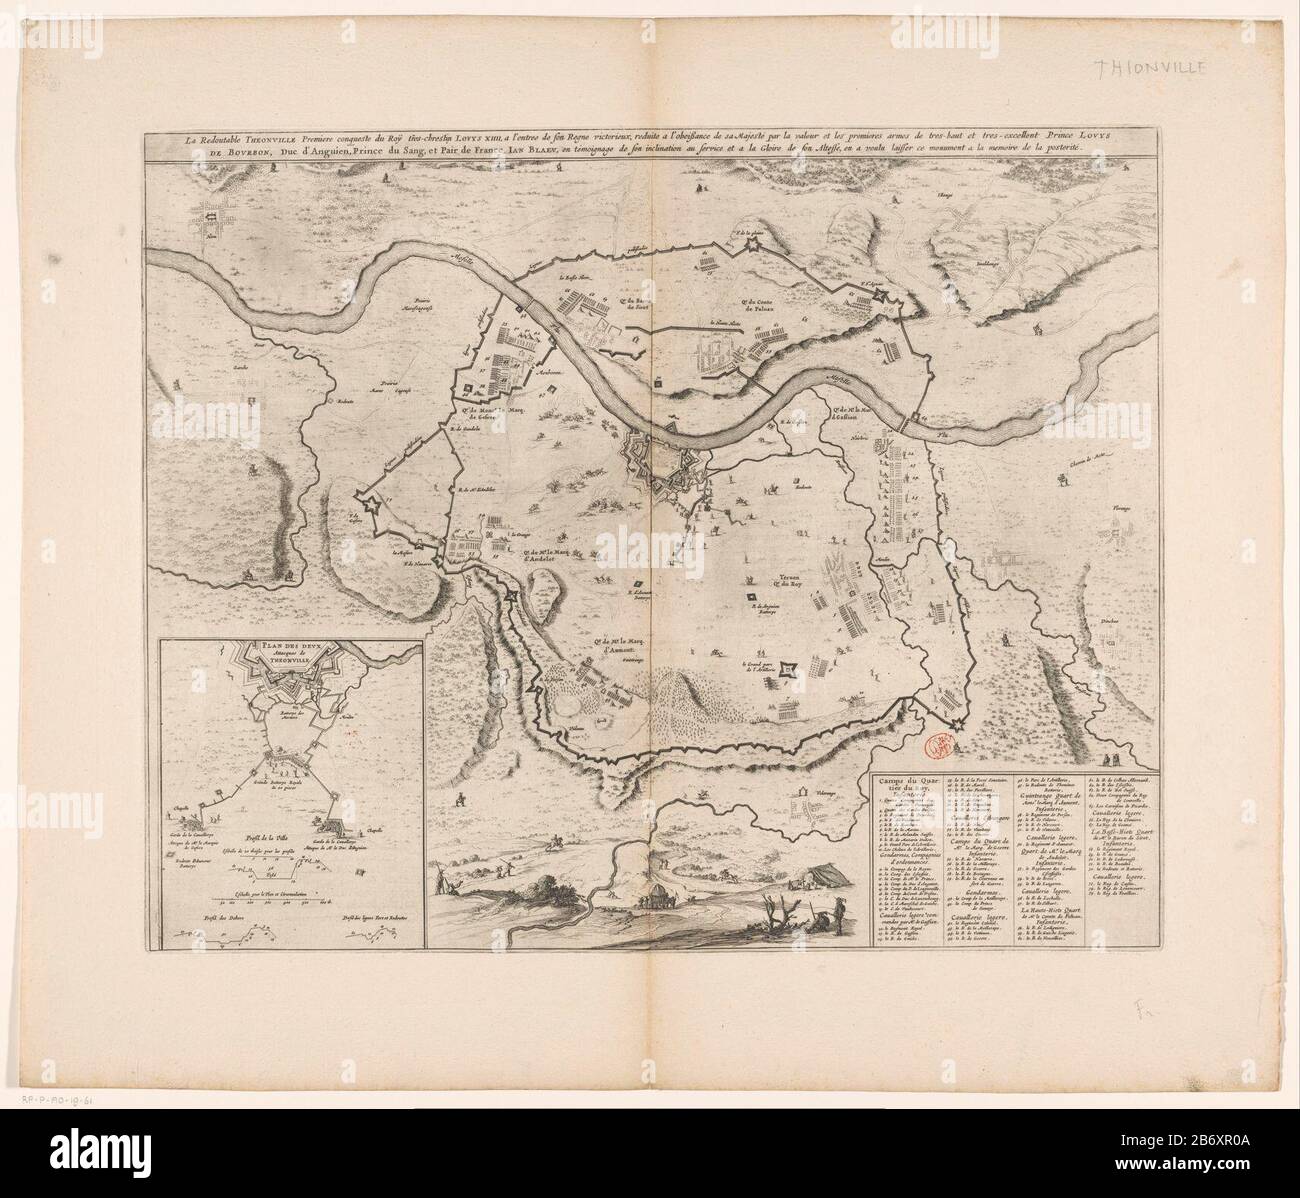 Kaart van het beleg van Thionville, 1643 La redoutable Theonville premiere  conqueste du roy tres-chrestin (titel op object) map of the siege of the  city of Thionville by the French army on